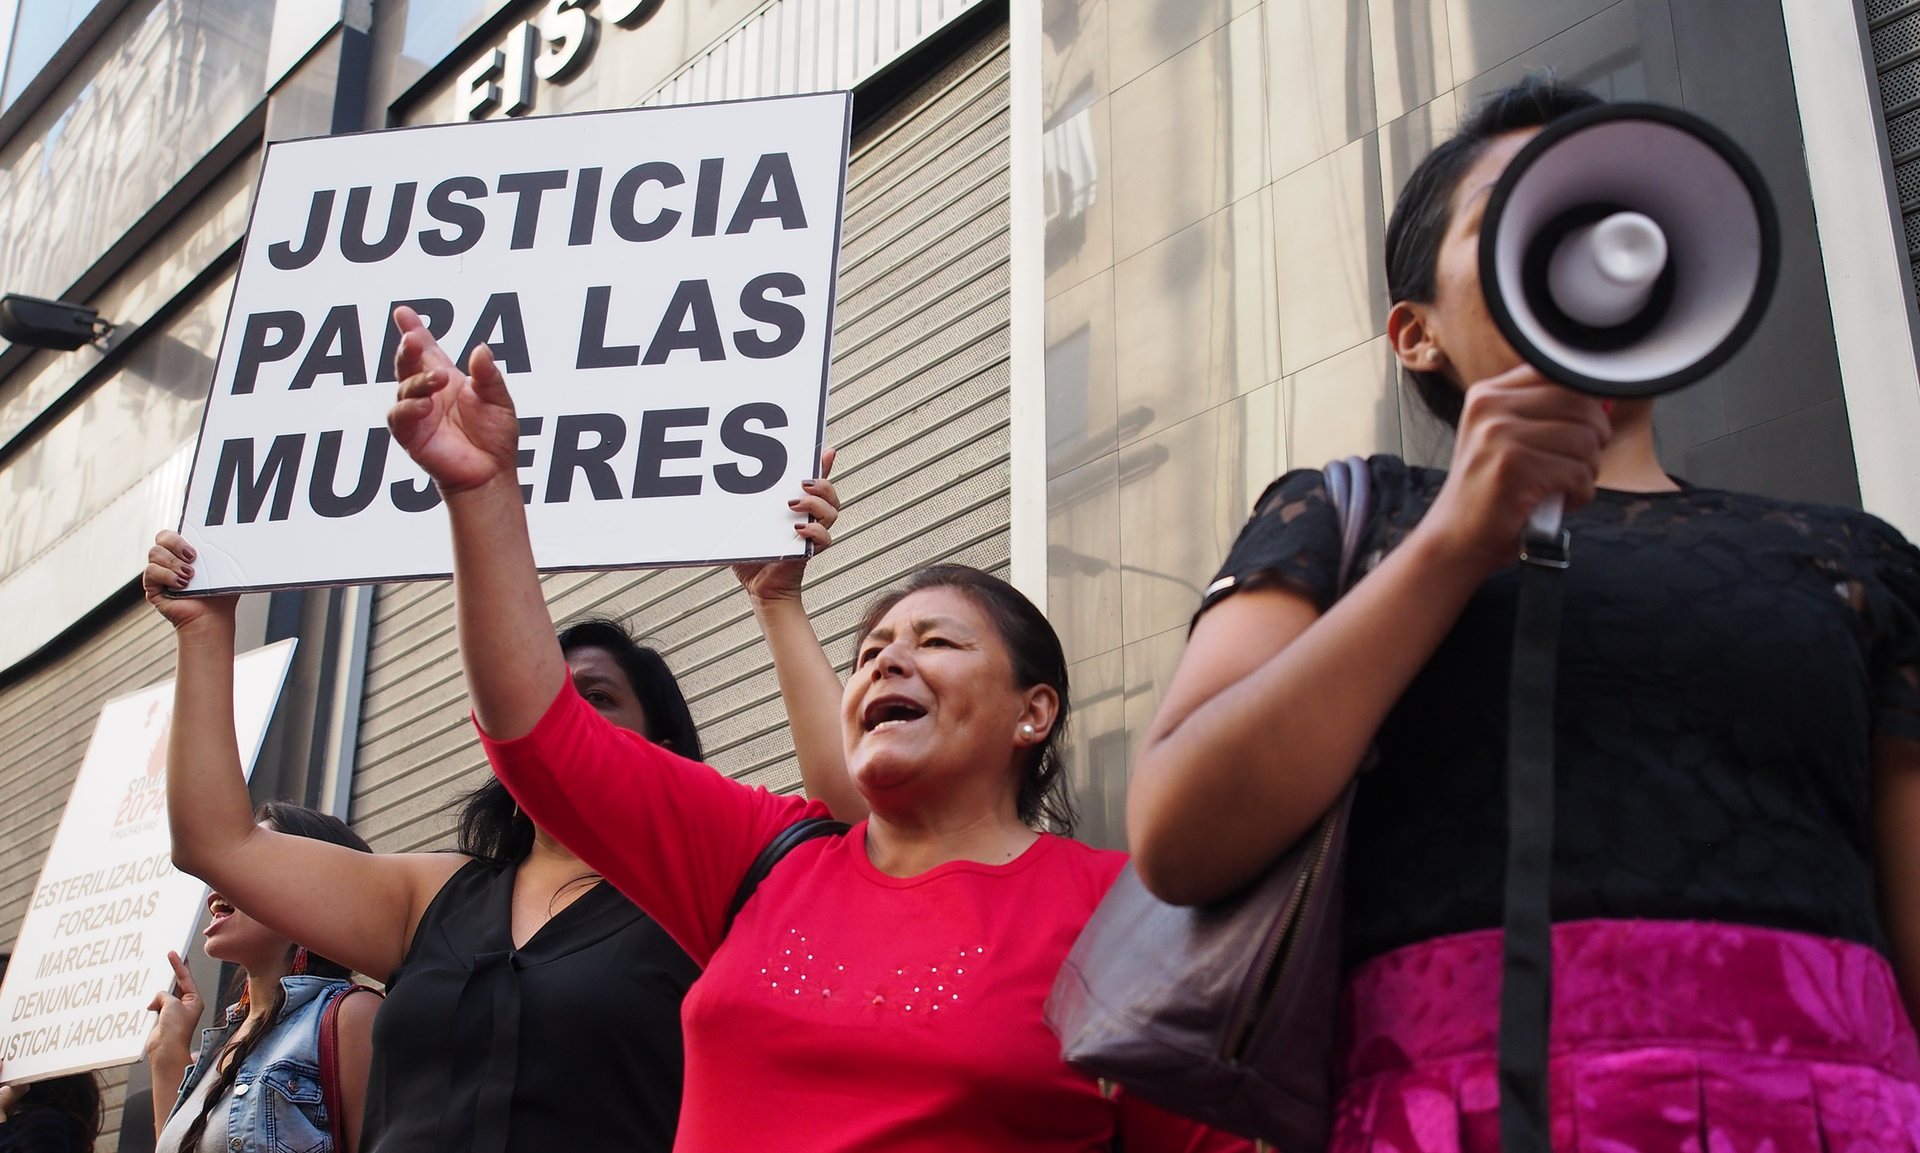 Women protest outside the prosecutor’s office in Lima demanding justice for rural women who were forcibly sterilised, 10 May 2016. Photograph: Pacif/Rex/Shutterstock